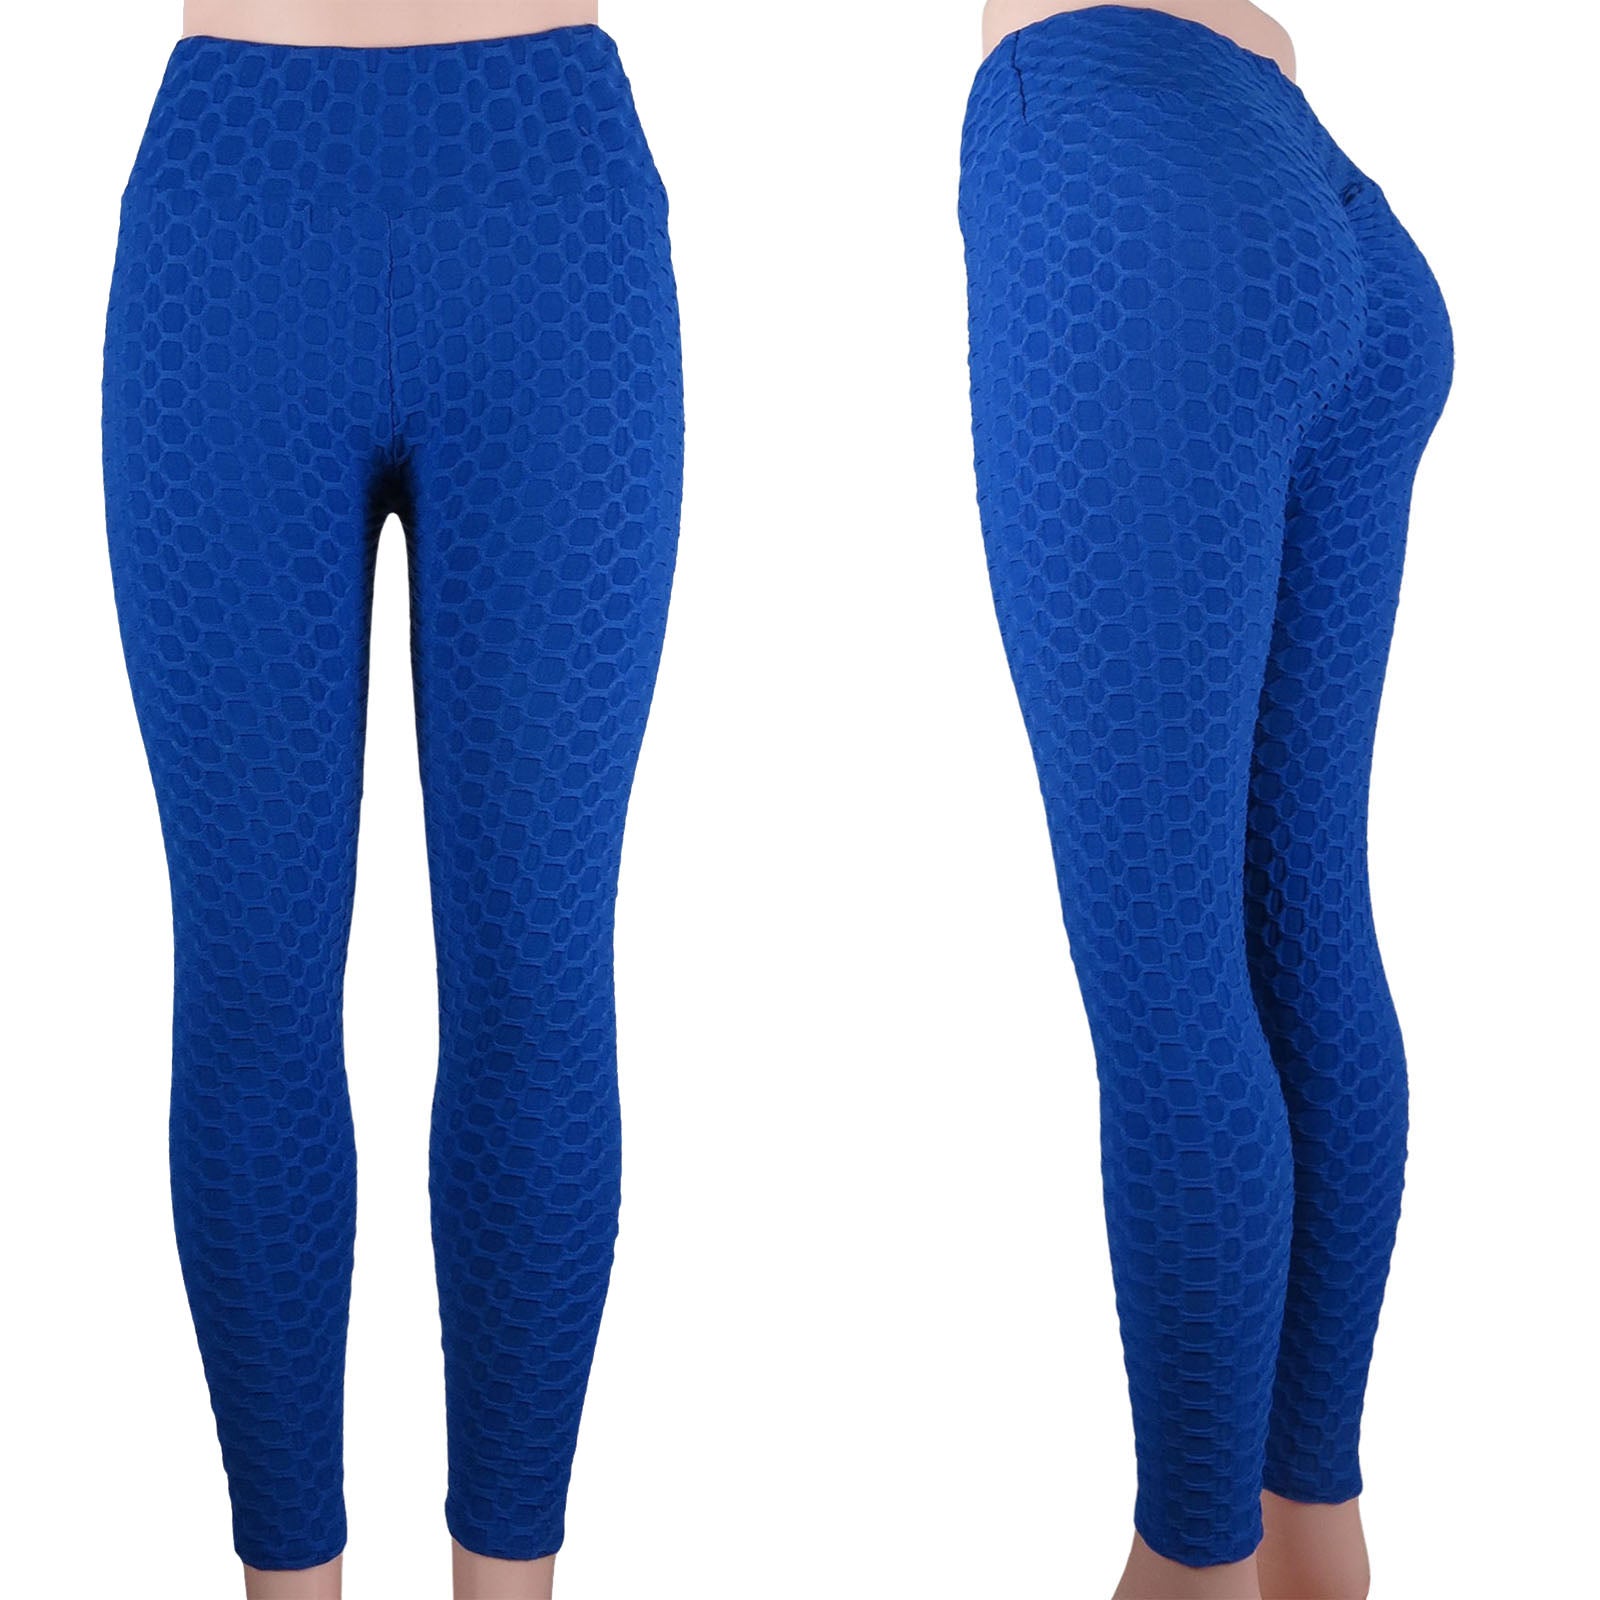 Wholesale bubble pattern tiktok leggings with a high waist and anti cellulite scrunch butt compression in royal blue